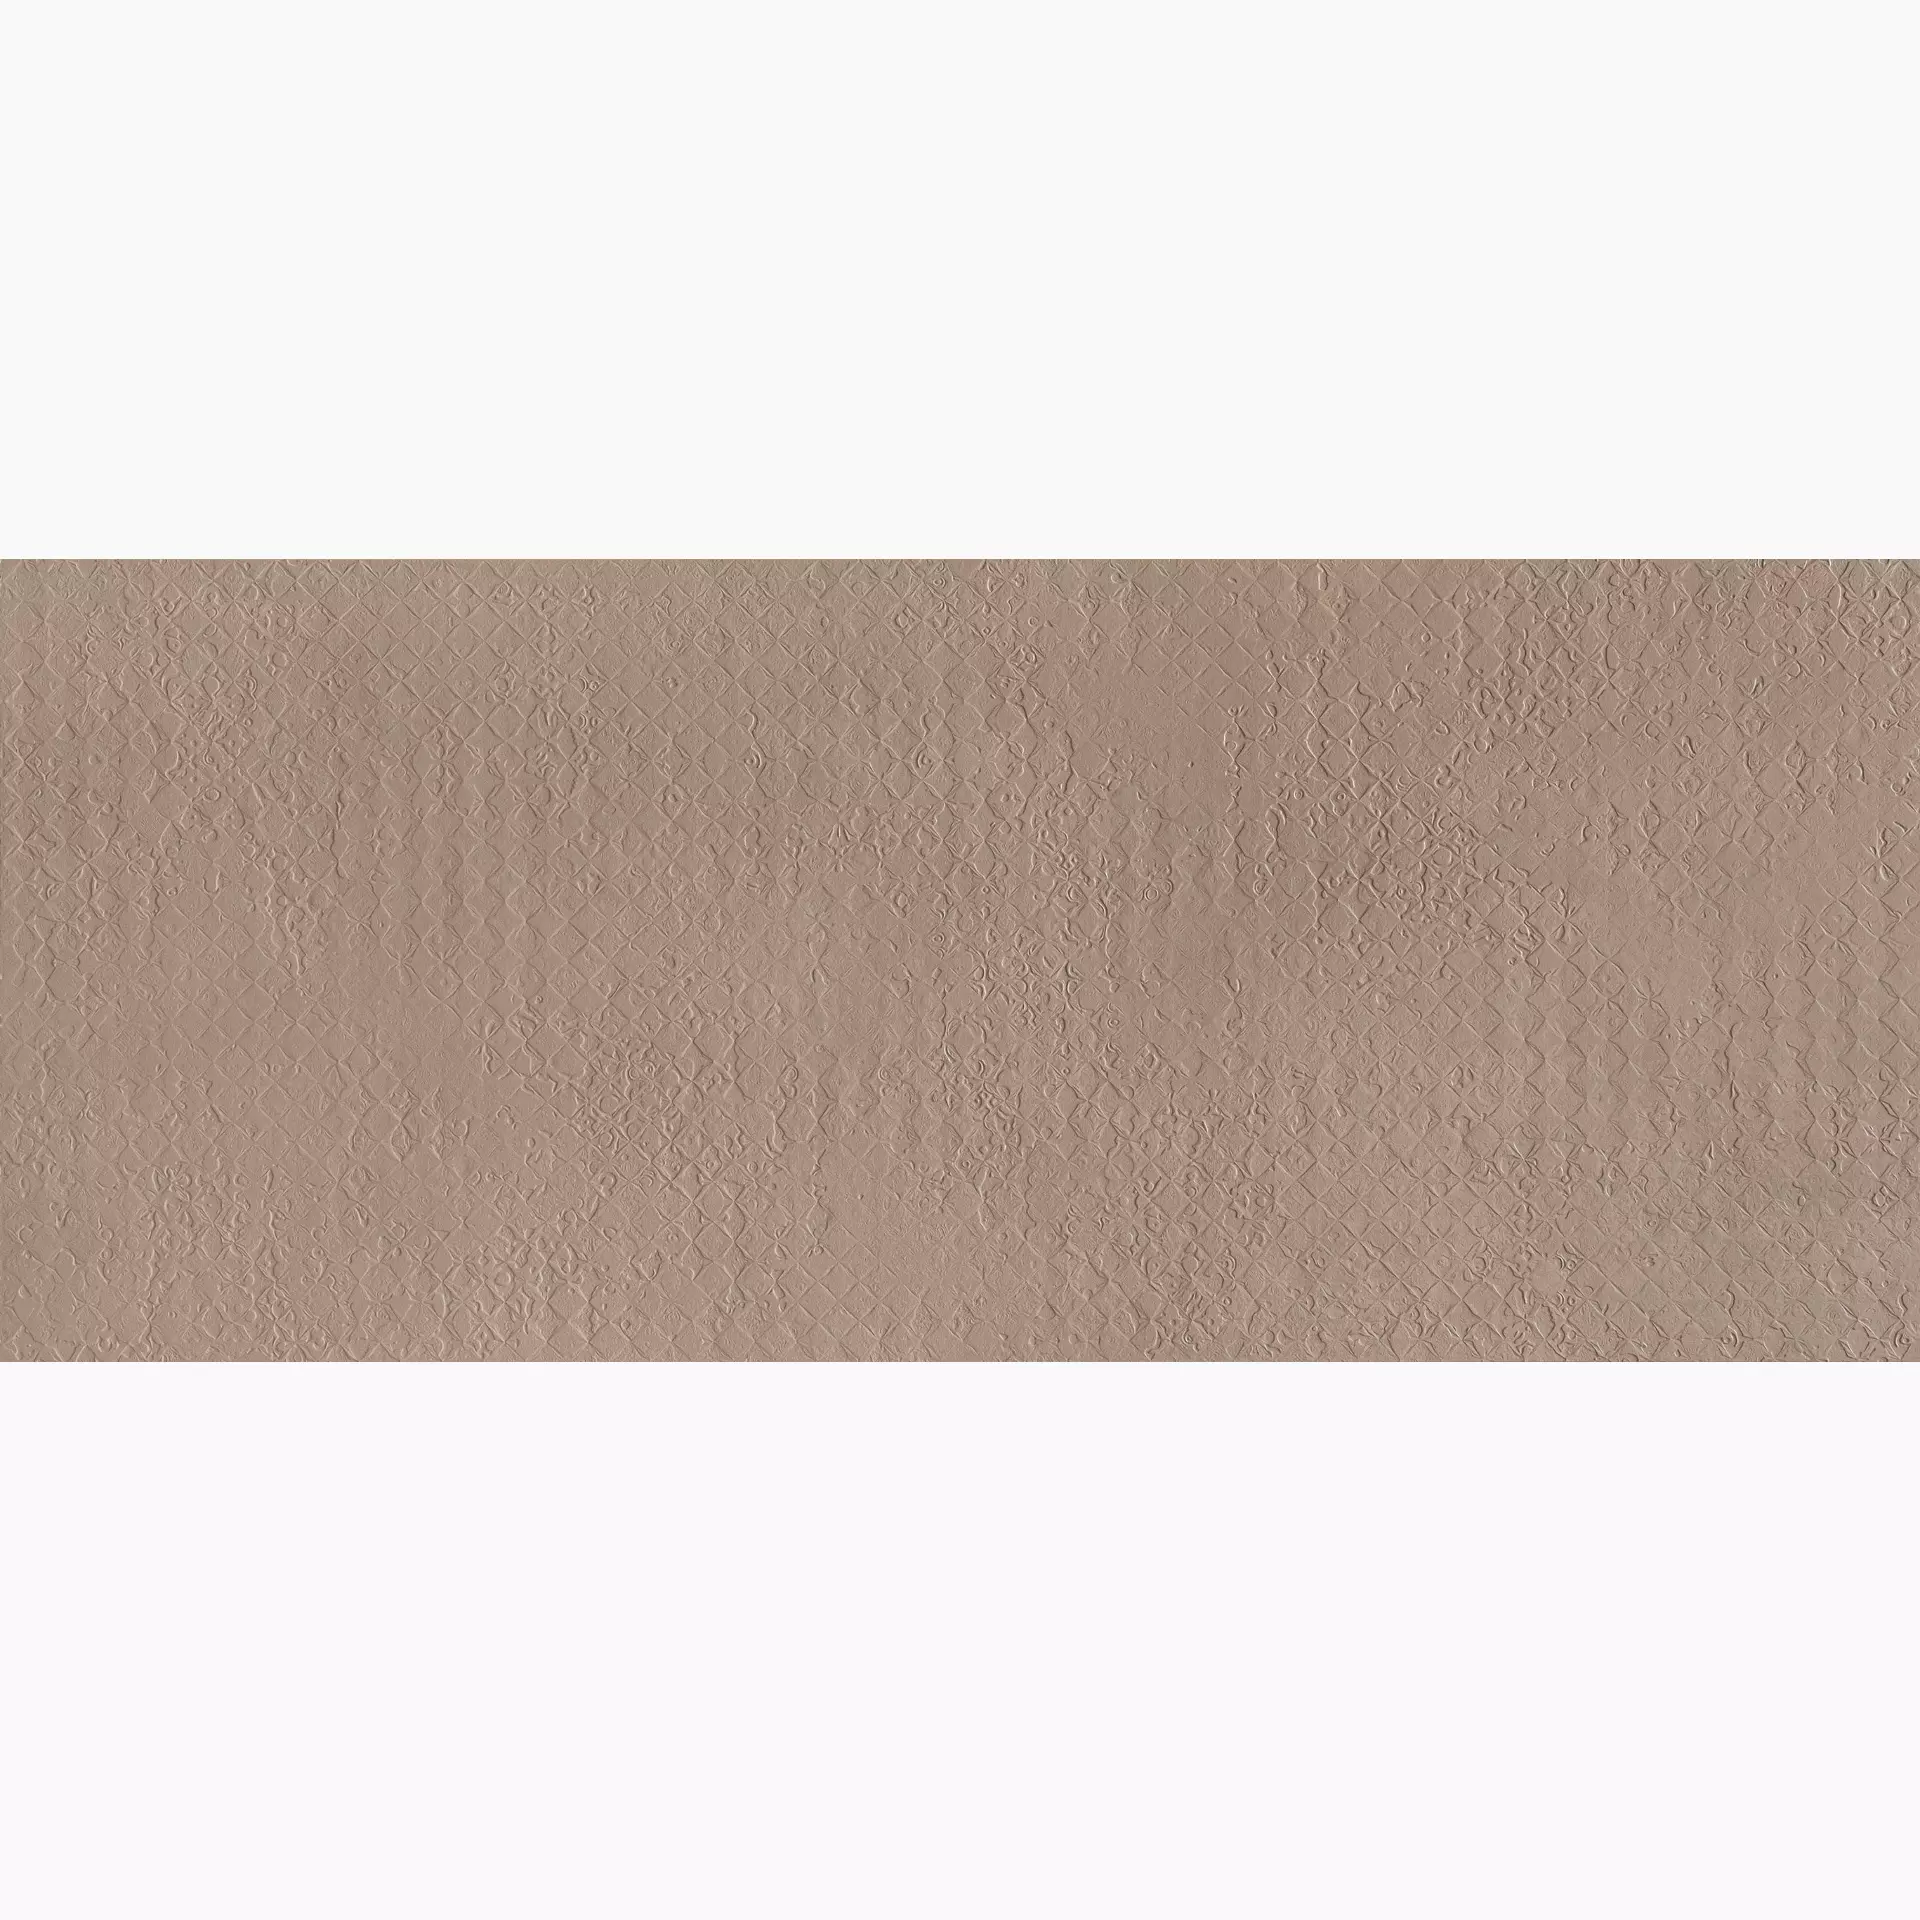 Supergres Colovers Wall Love Brown Nest Struttura Nest LWNS 50x120cm rectified 8,5mm